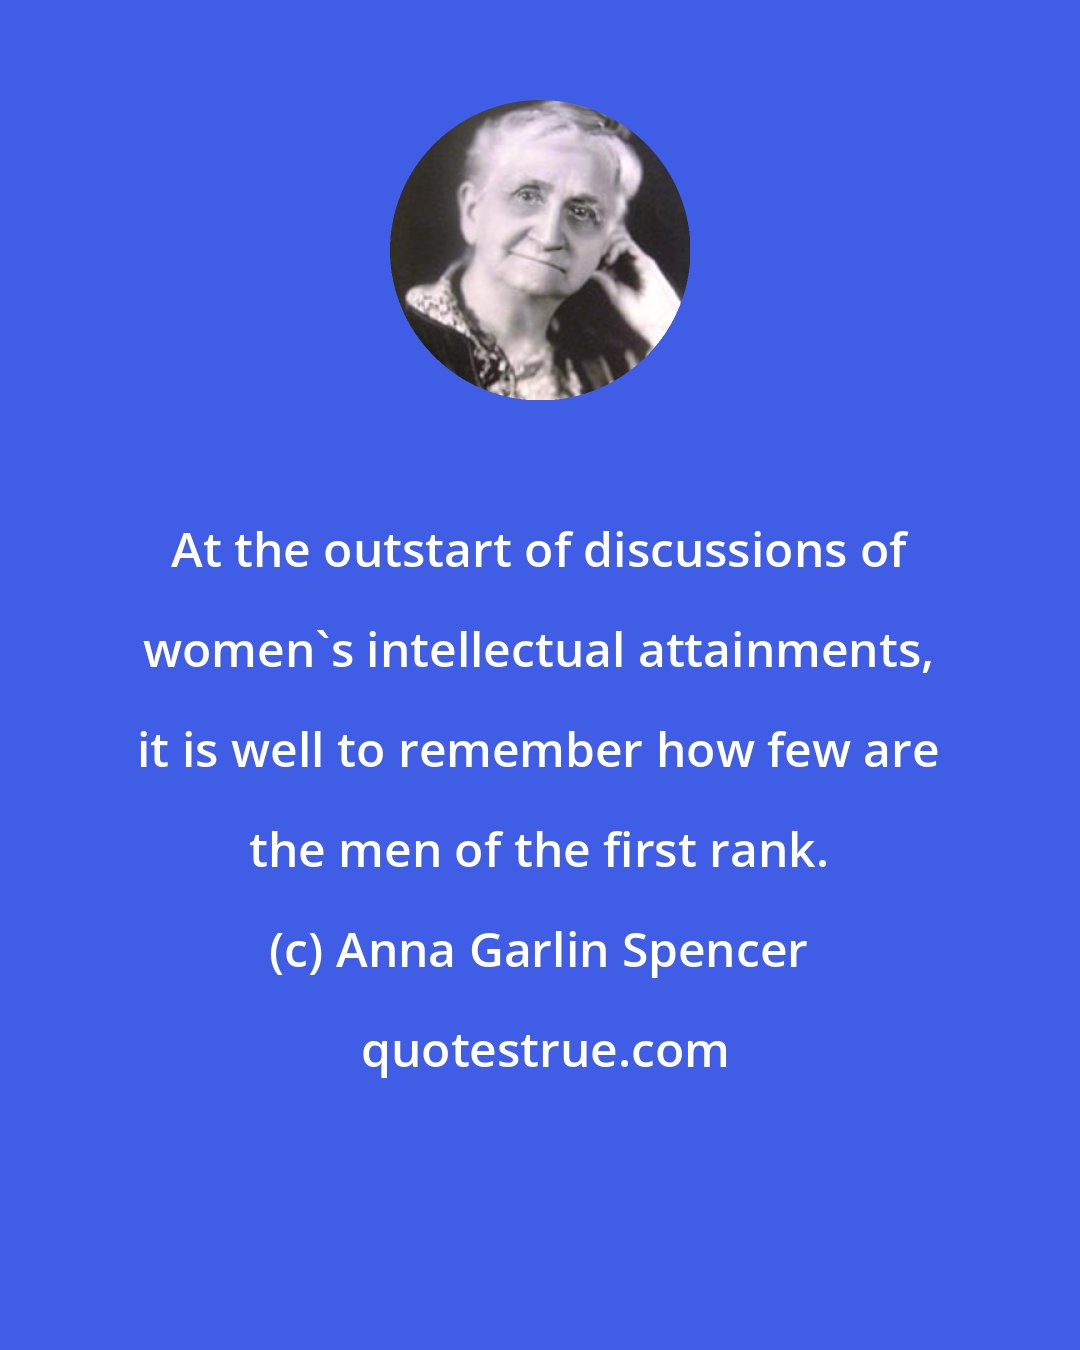 Anna Garlin Spencer: At the outstart of discussions of women's intellectual attainments, it is well to remember how few are the men of the first rank.